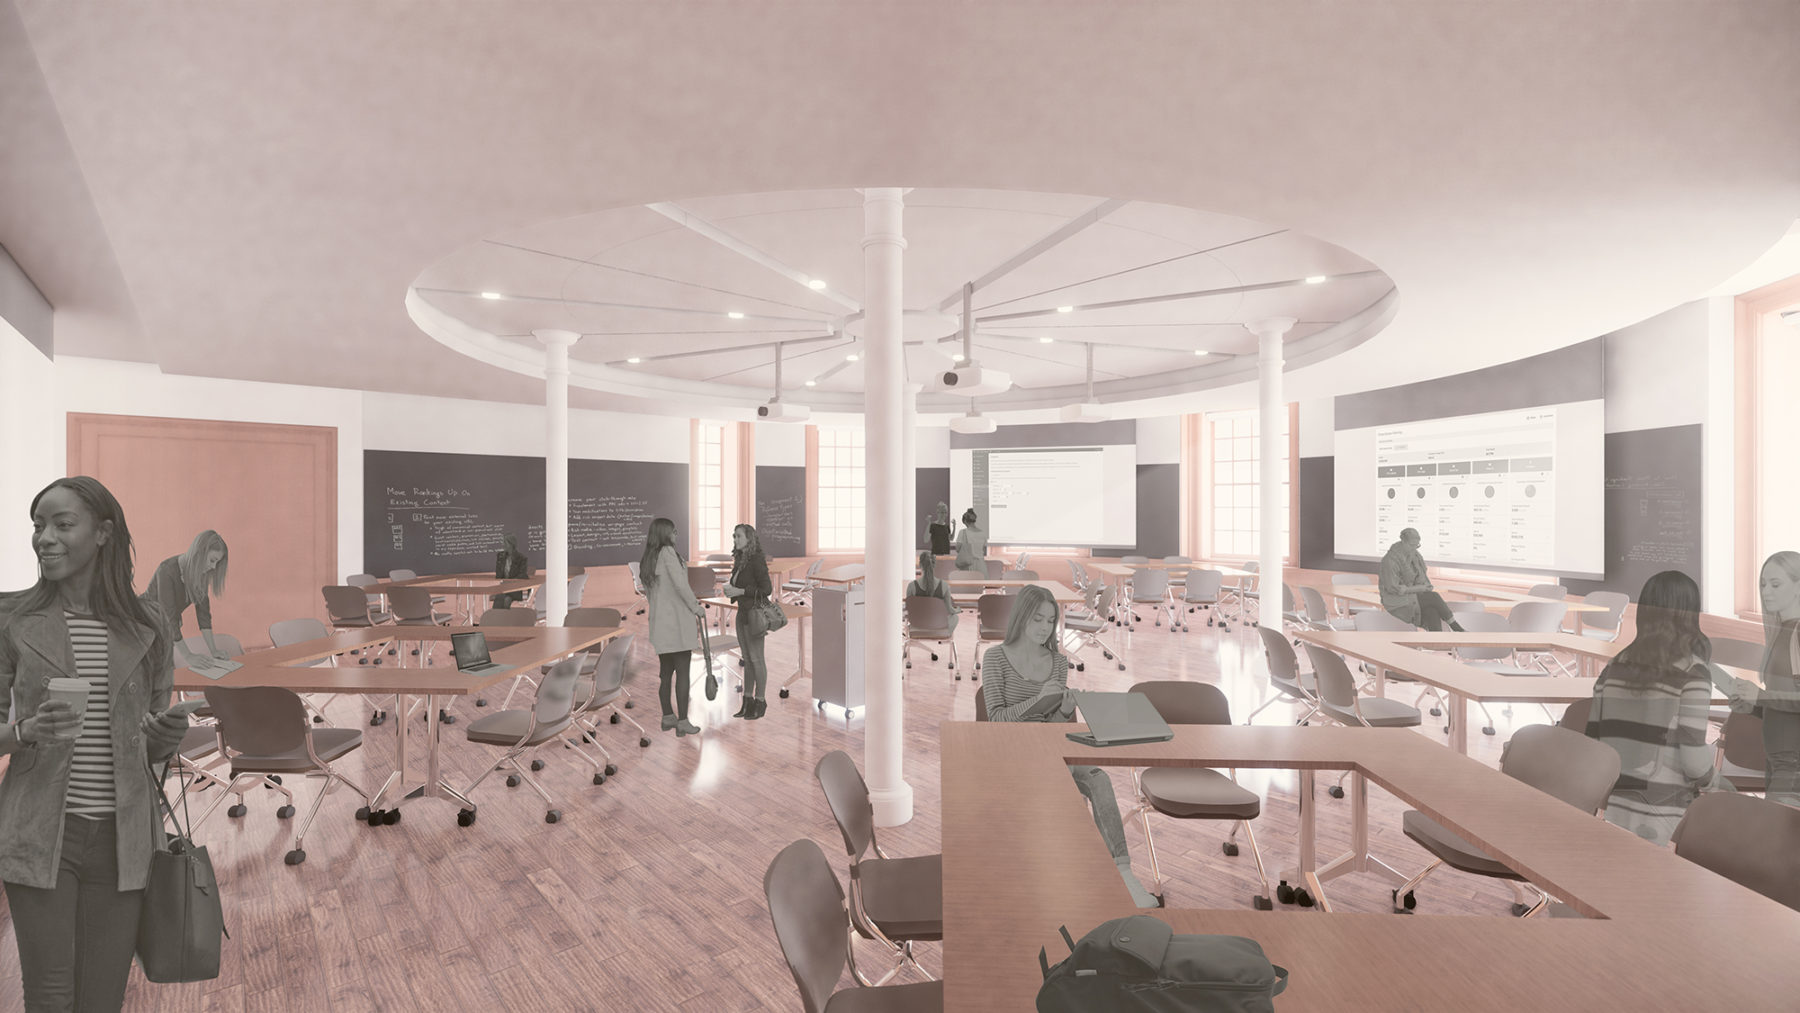 Rendering of students in a circular classroom